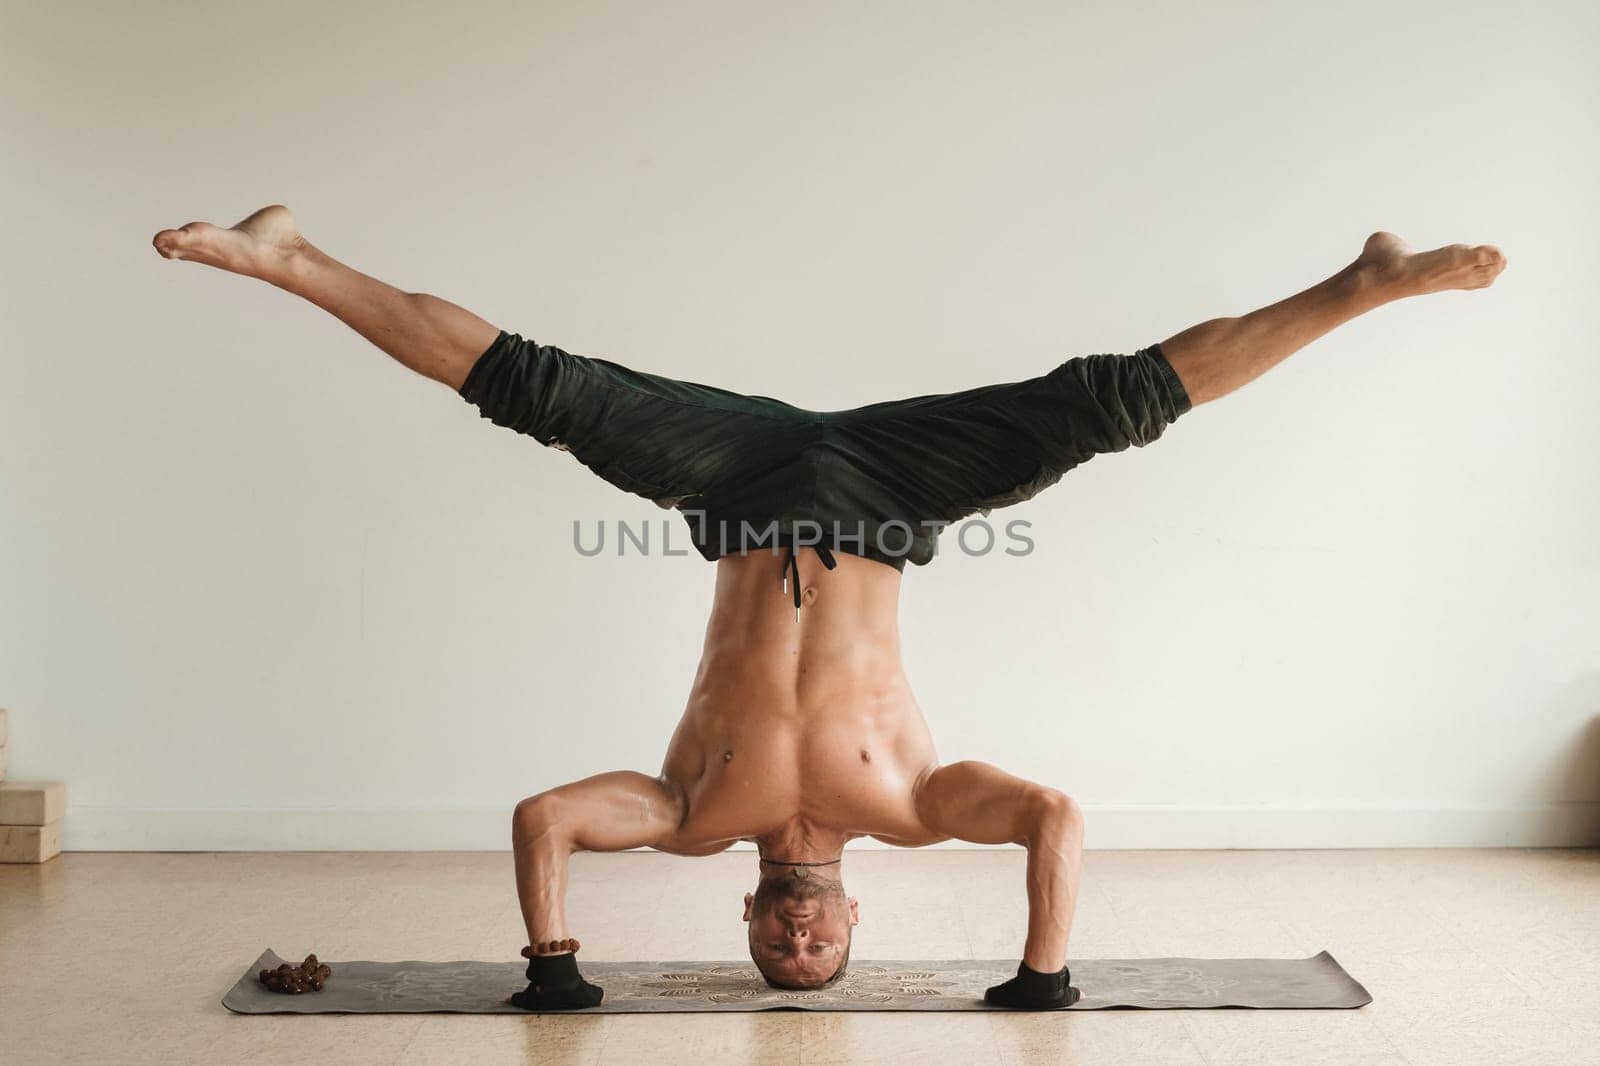 a man with a naked torso does yoga standing on his head indoors. Fitness Trainer.